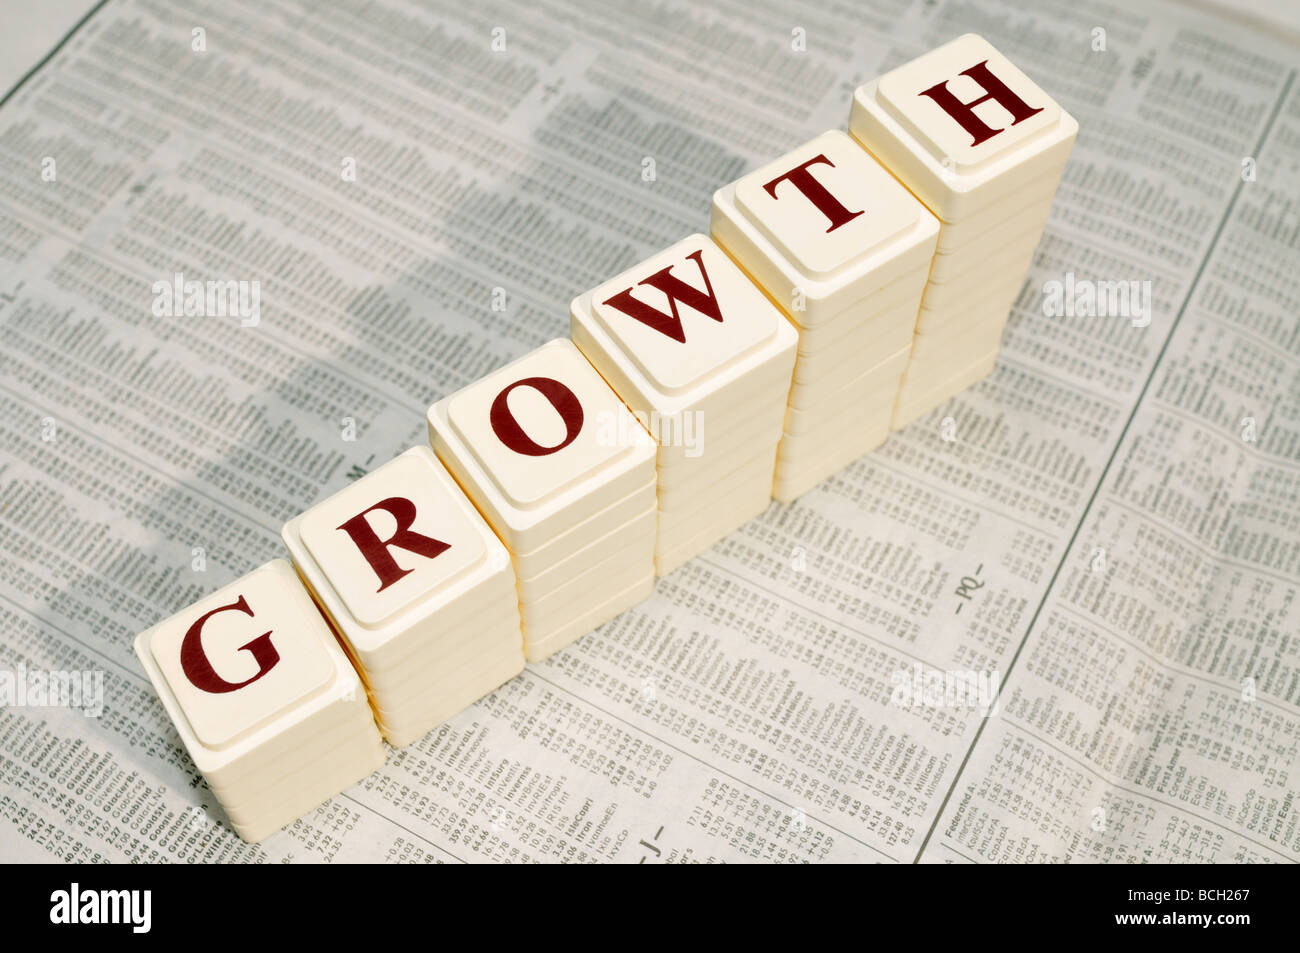 Growth spelled out on stock page Stock Photo